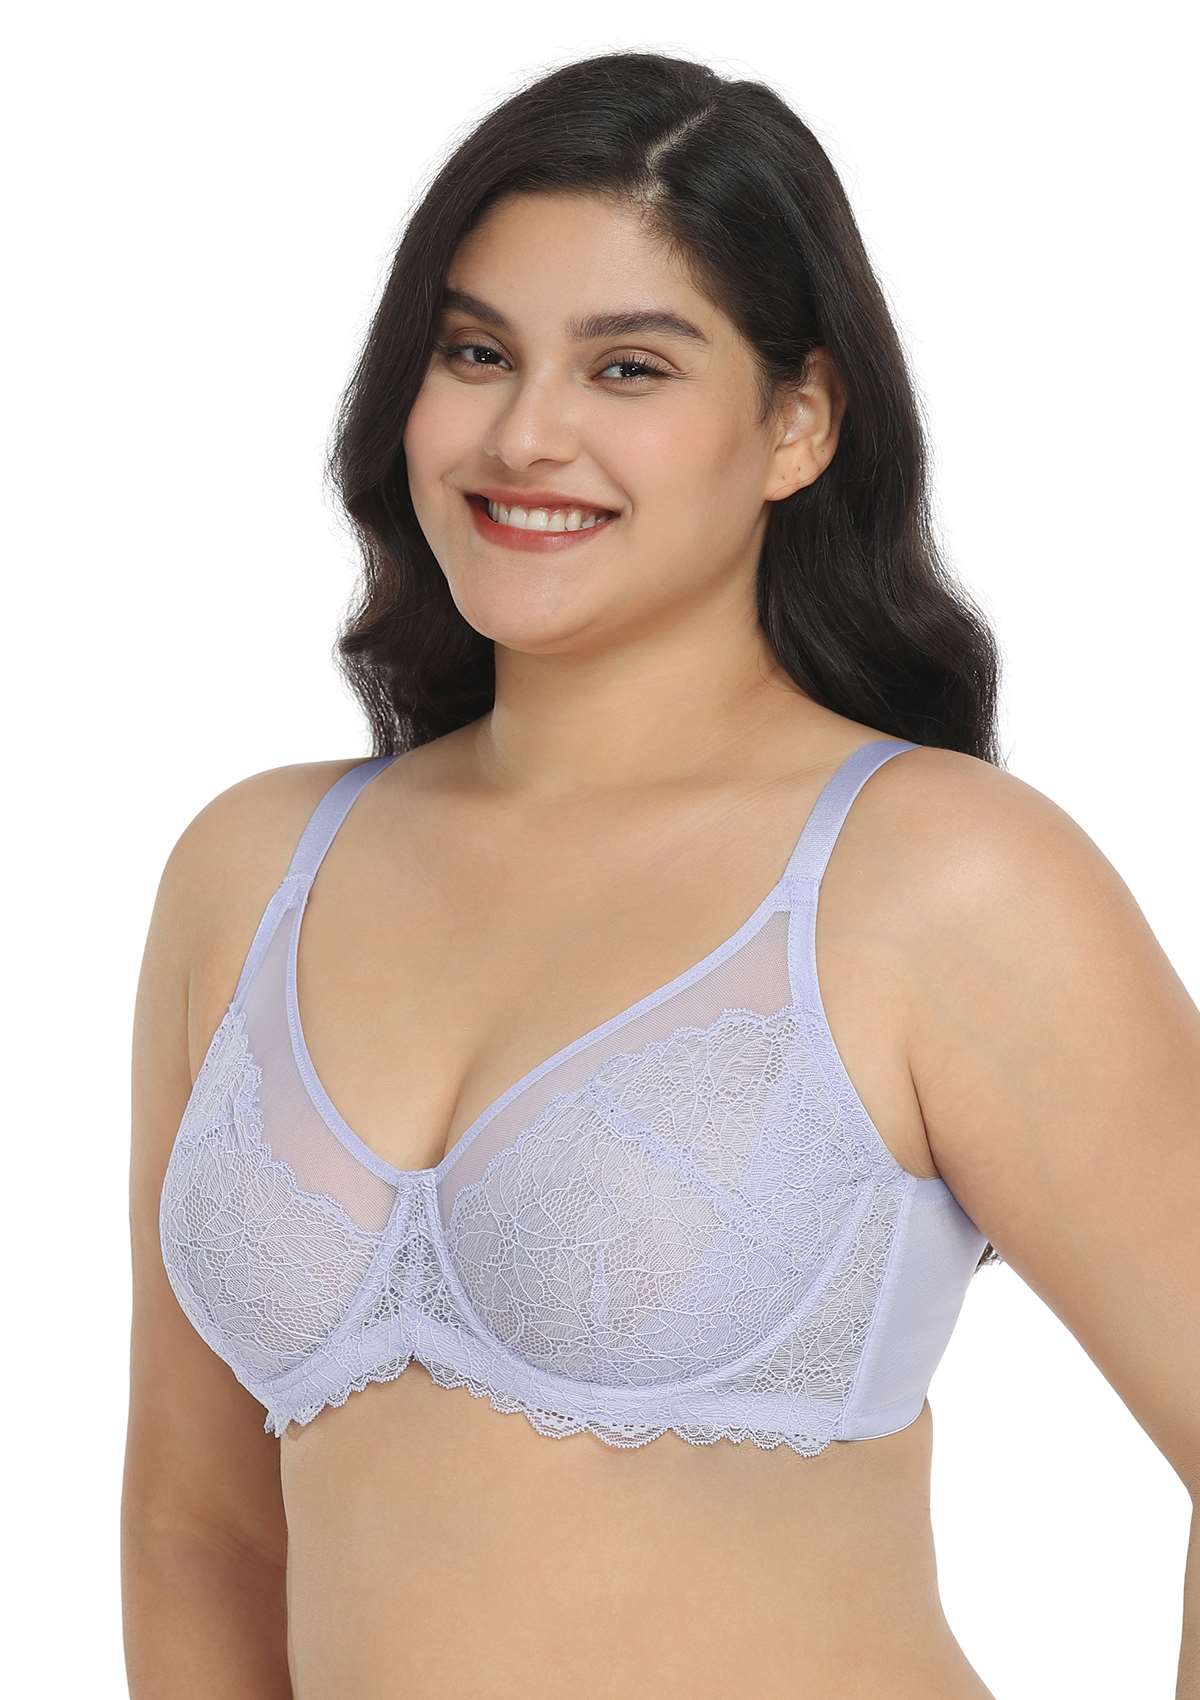 HSIA Wisteria Bra For Lift And Support - Full Coverage Minimizer Bra - Light Pink / 36 / DDD/F